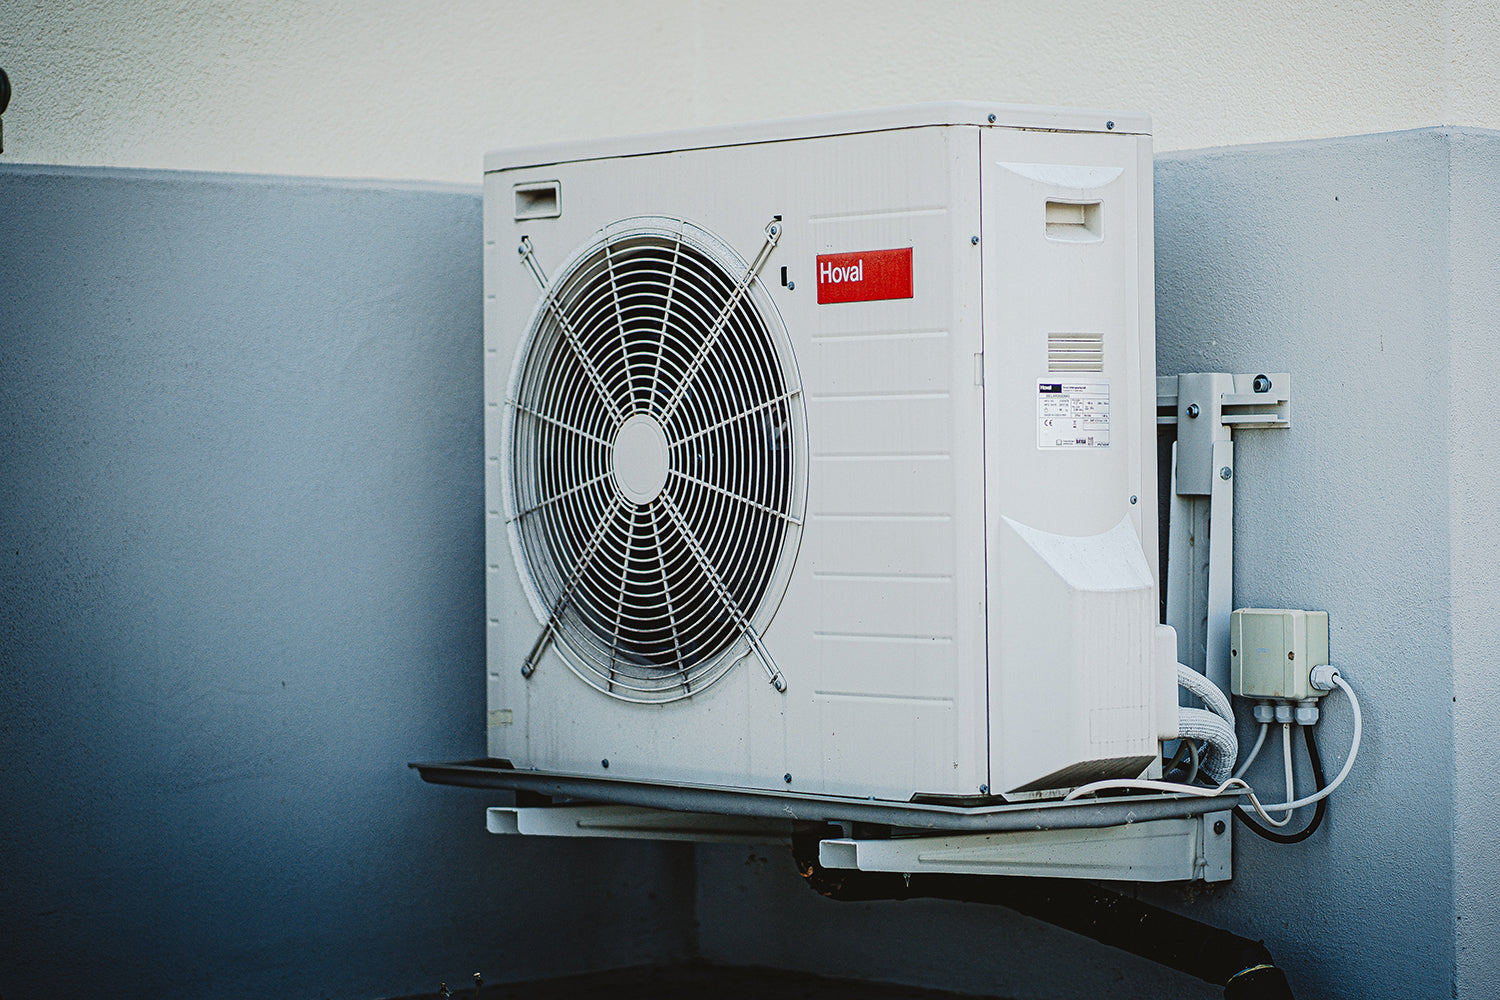 Our yearly HVAC top picks